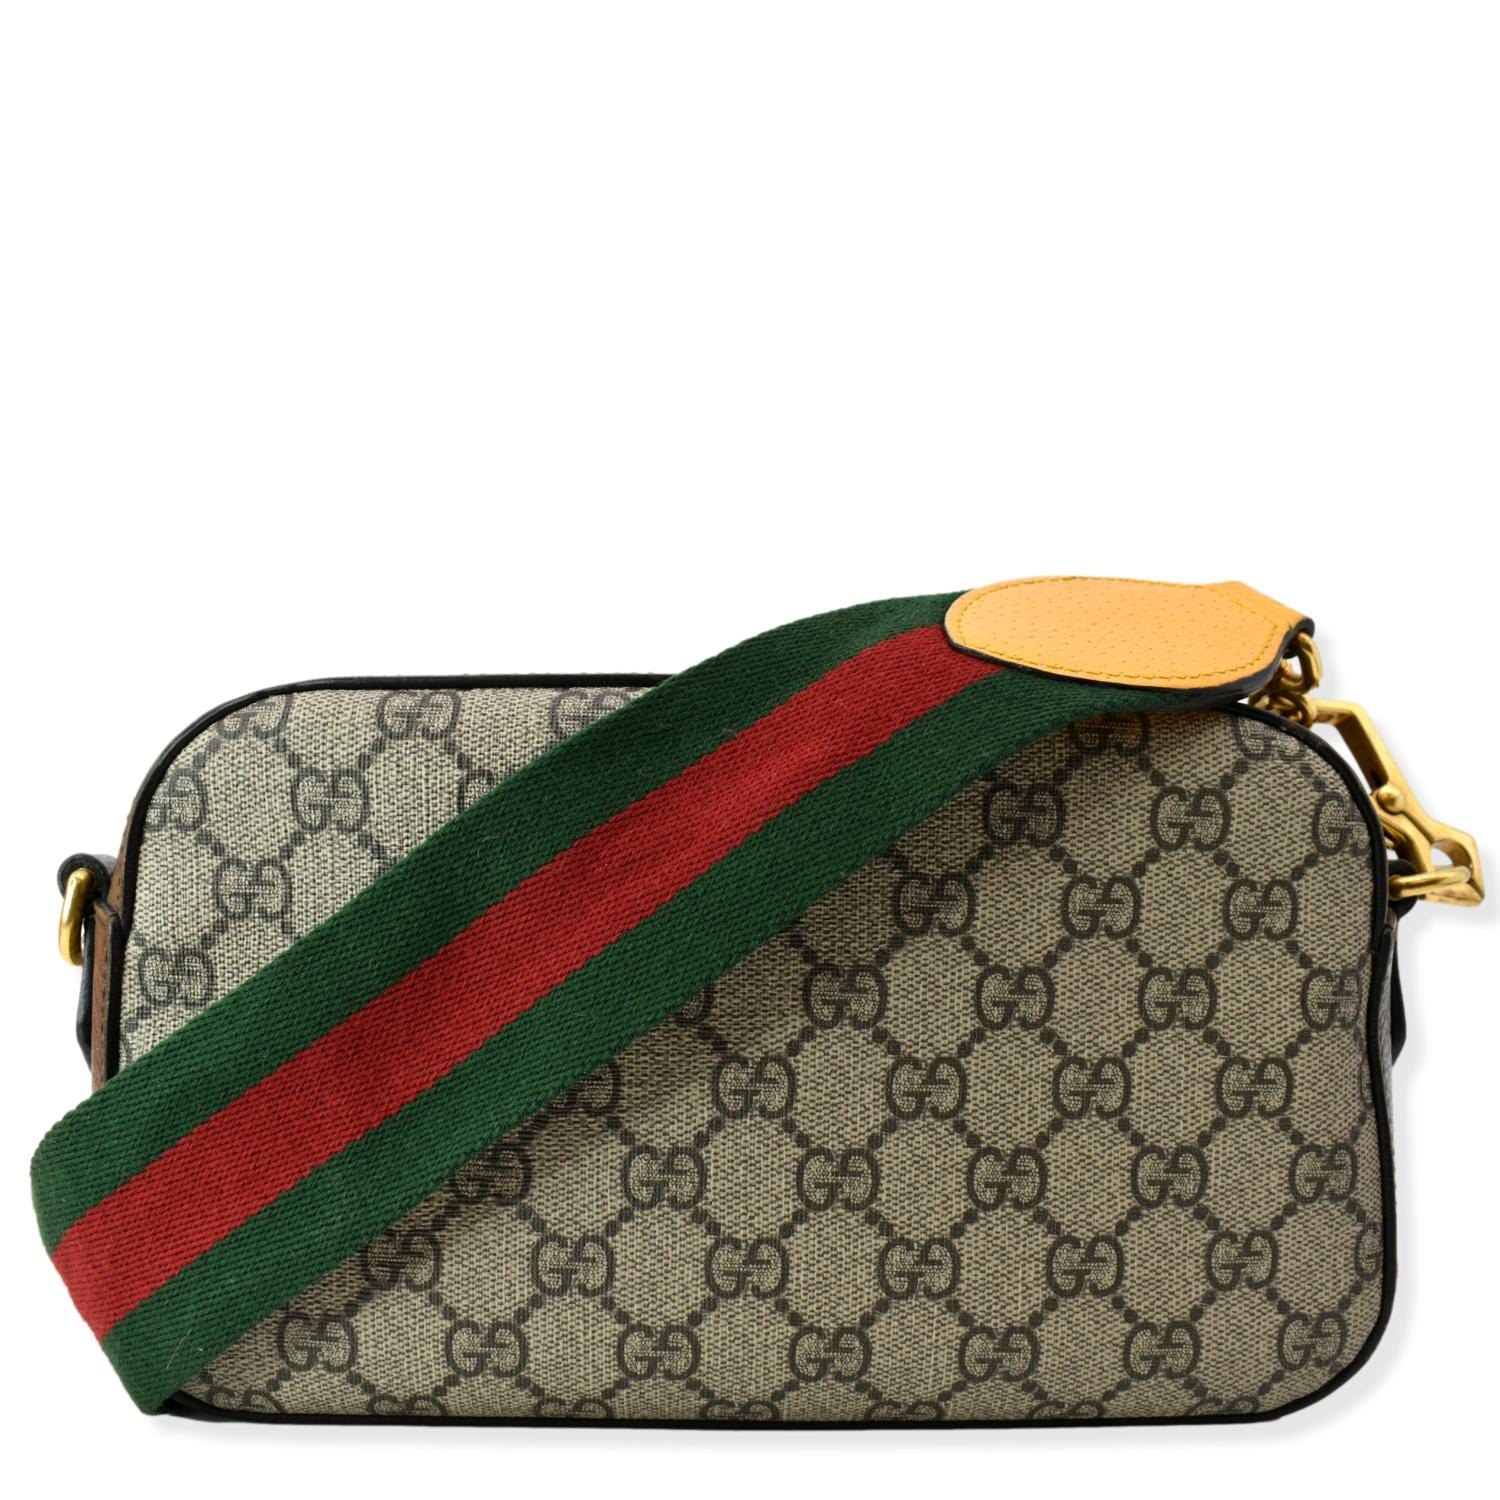 Gucci Neo Vintage Leather Clutch Bag